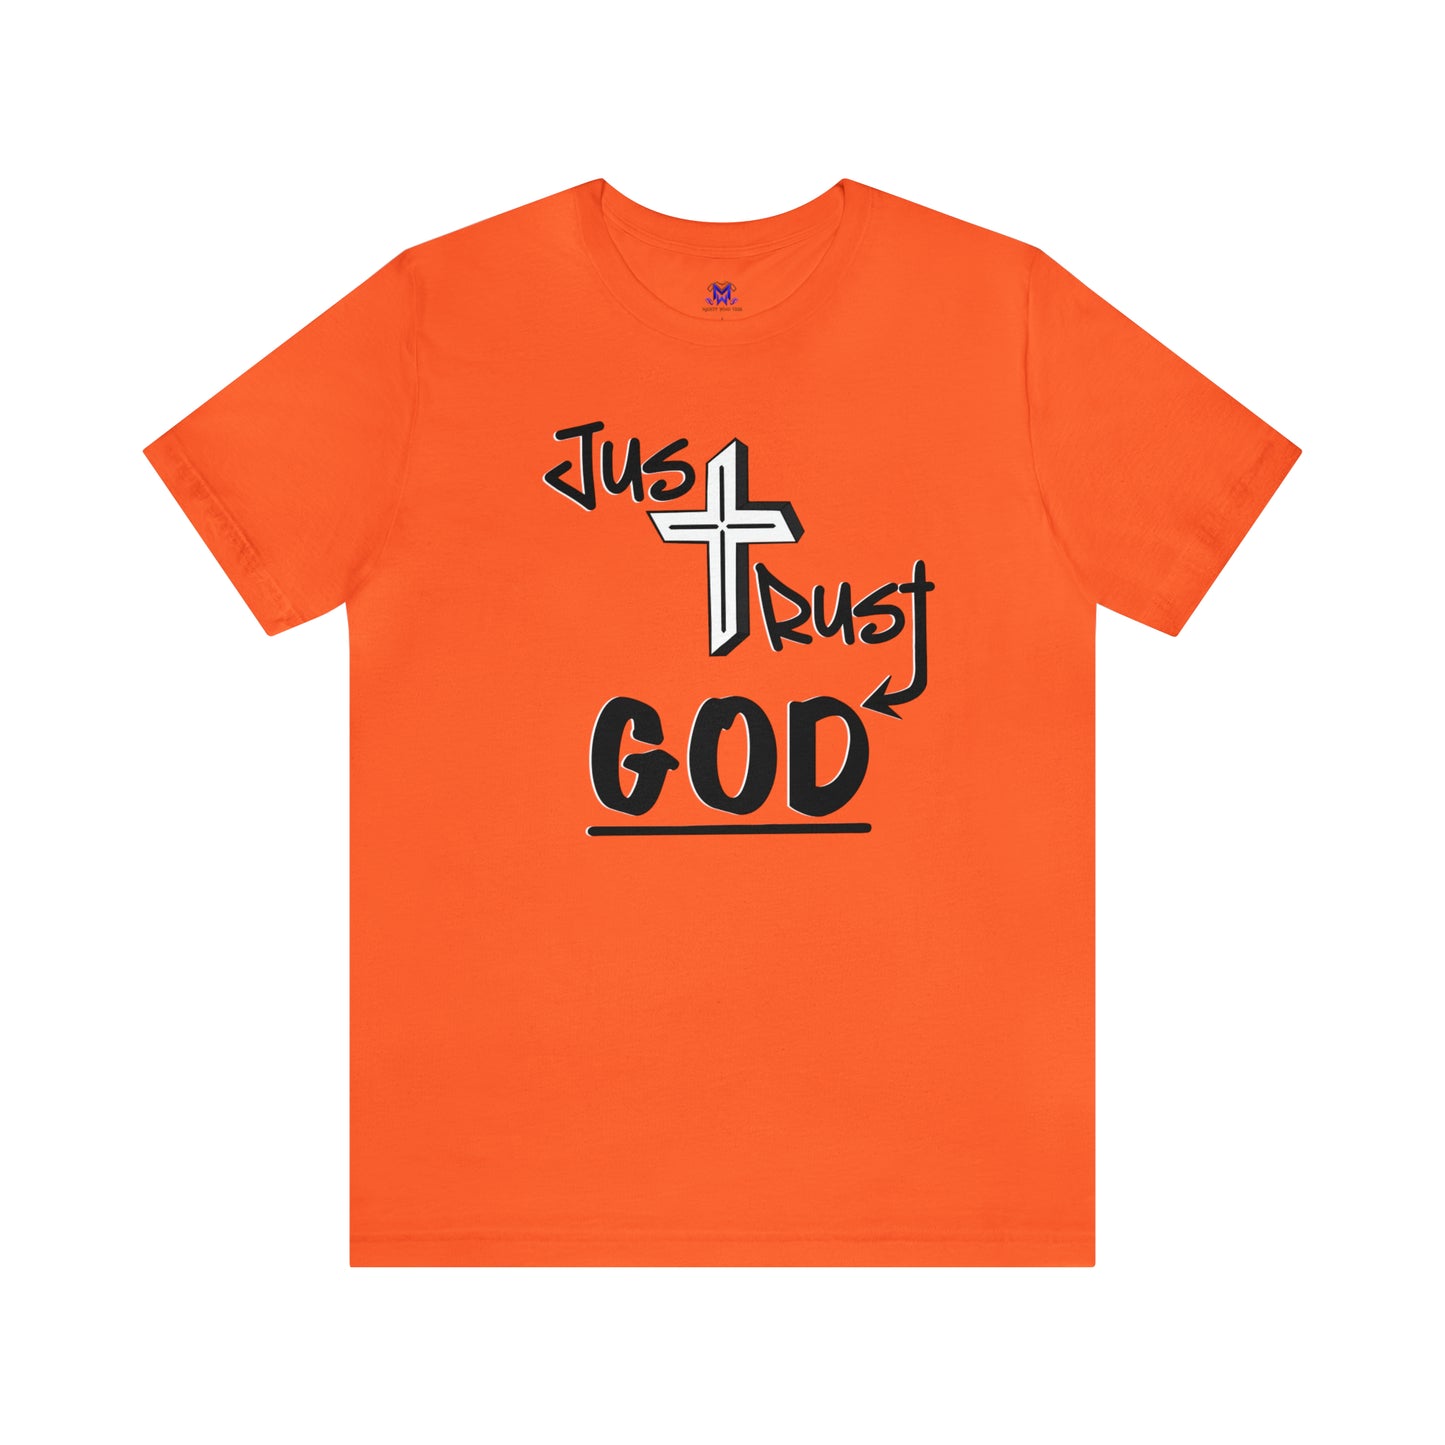 Just Trust God (Available in more colors)